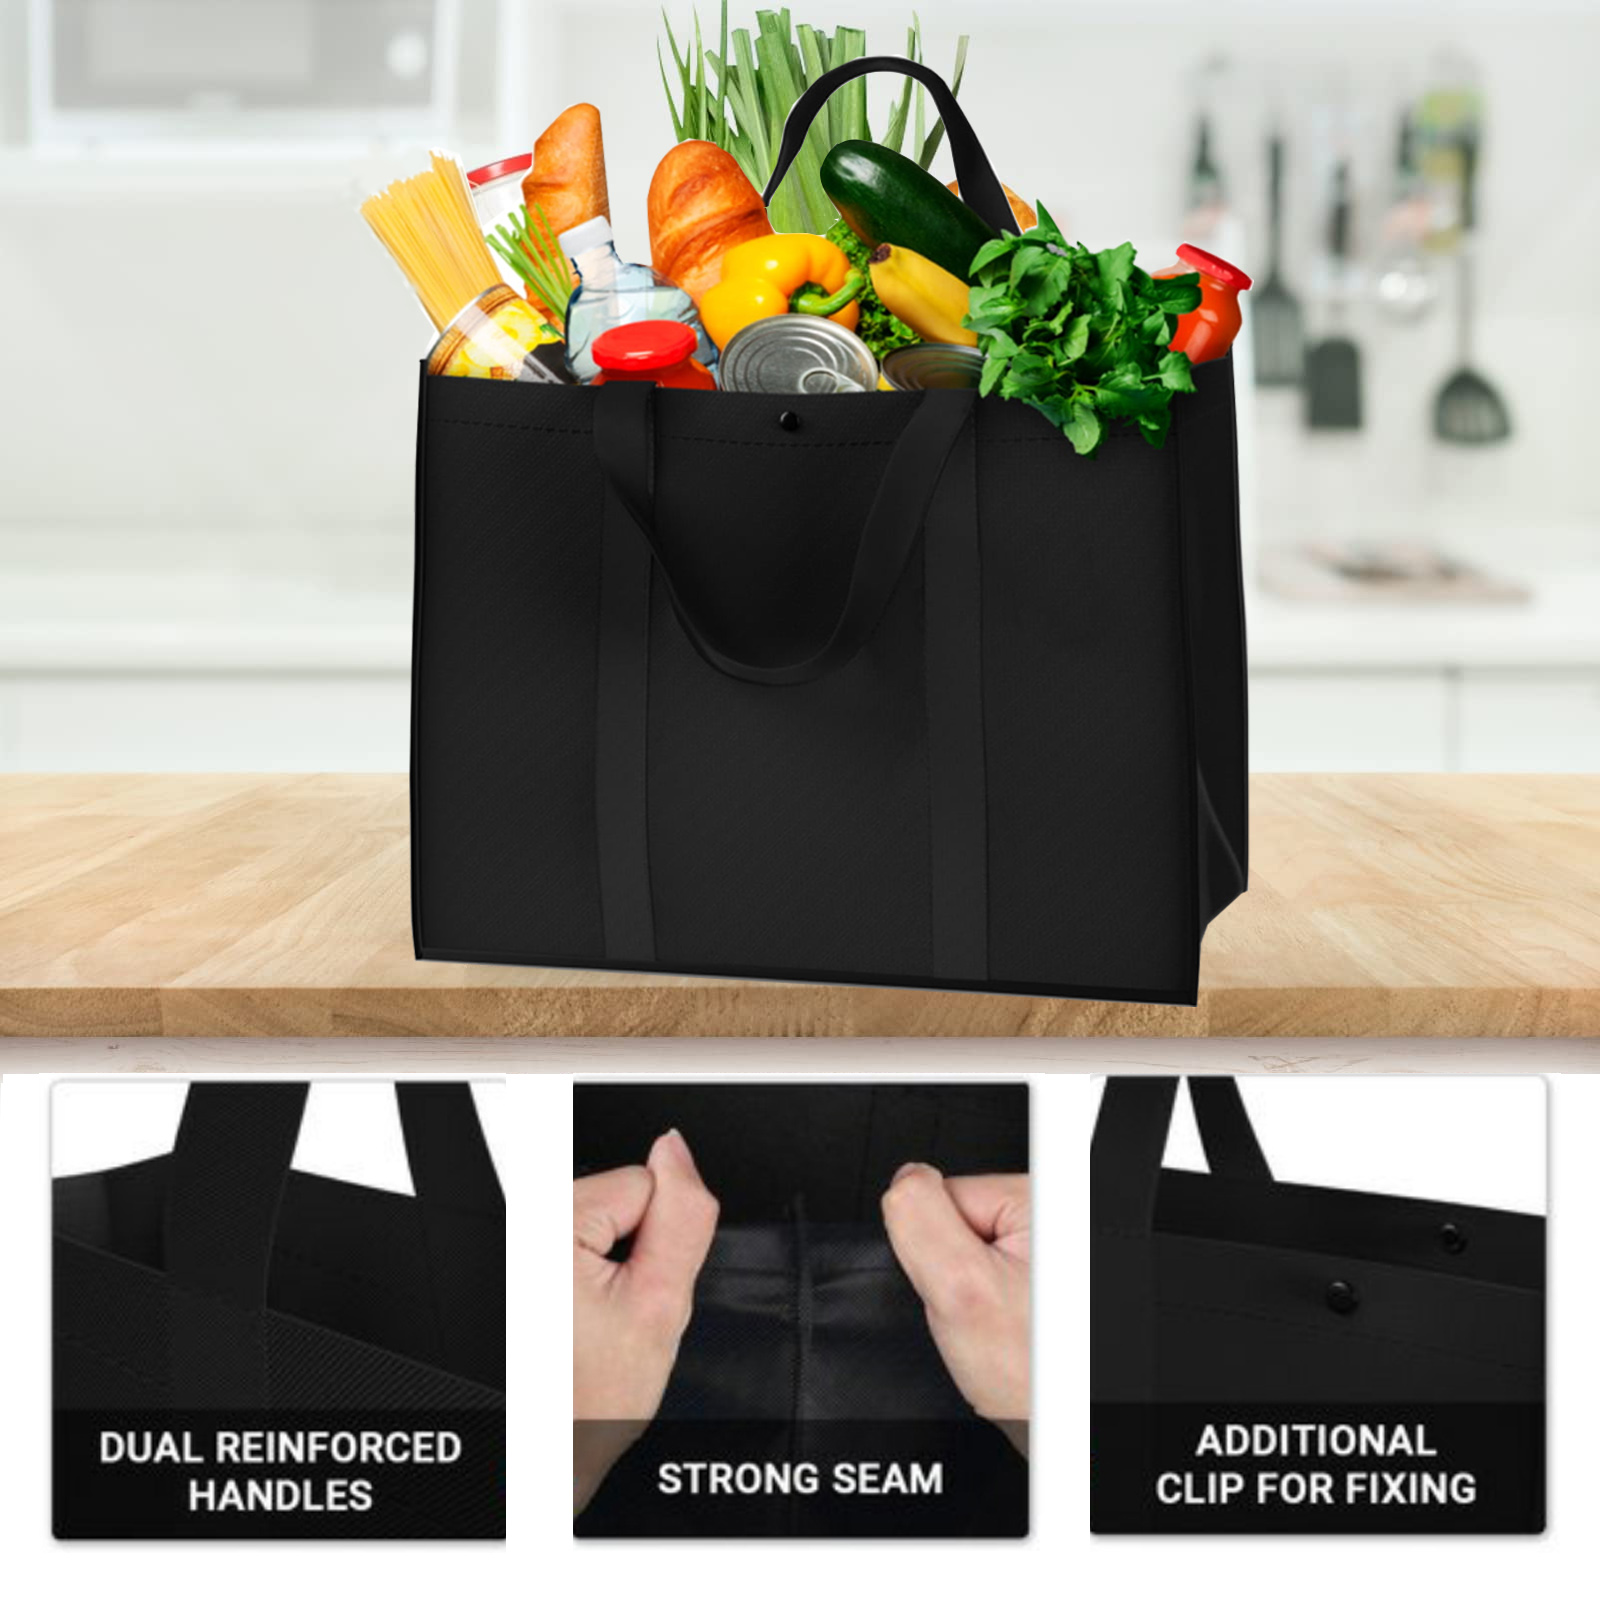 Set of 3 Reusable Grocery Bags,Large Foldable Heavy Duty Bag, Shopping Tote Produce Bag with Reinforced Handles & Thick Plastic Support Bottom, Black Washable Storage - image 3 of 6